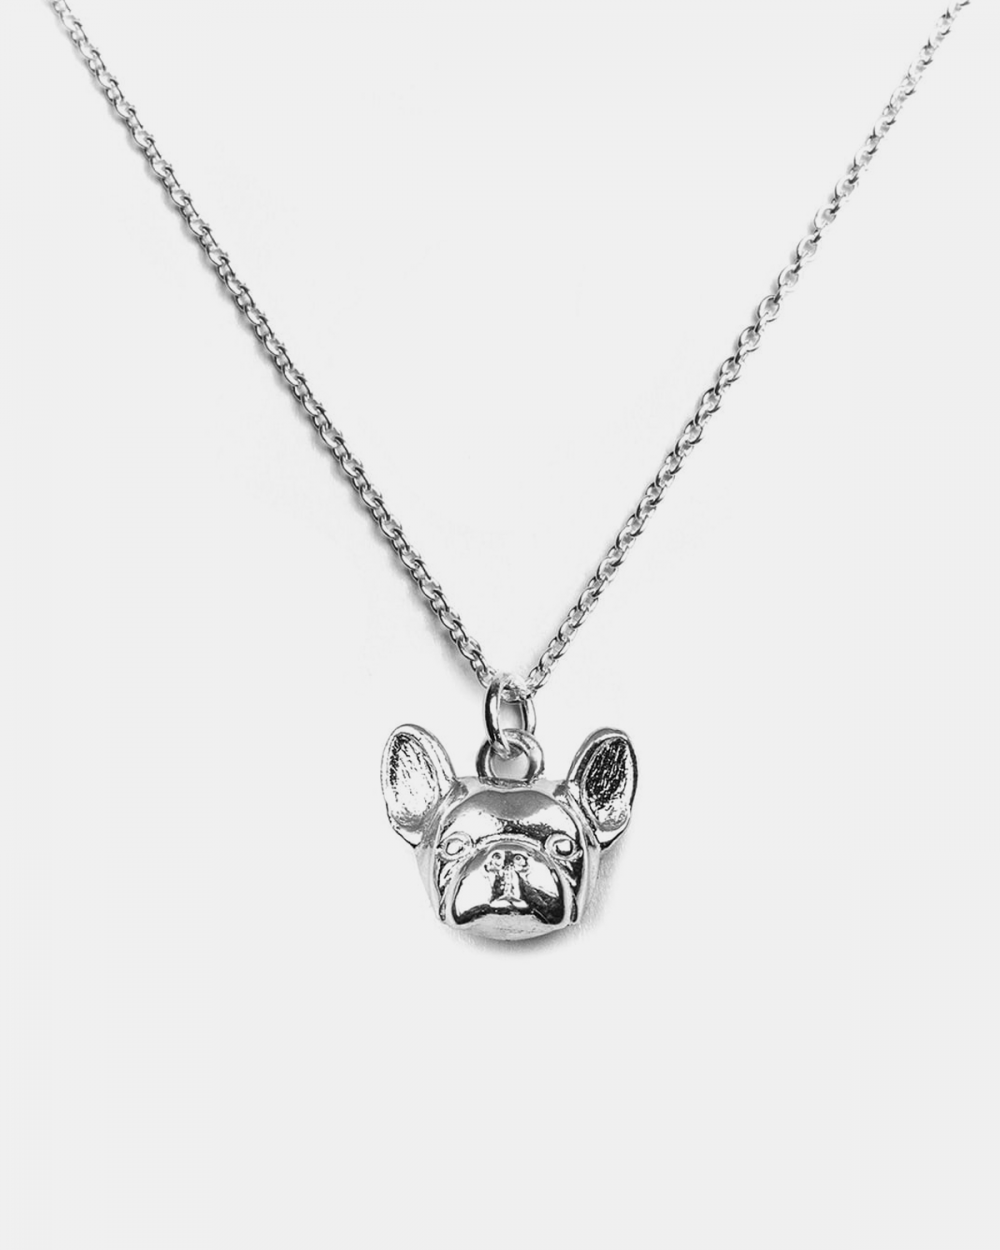 FRENCH BULLDOG PENDANT NECKLACE F040 L60 / POLISHED SILVER